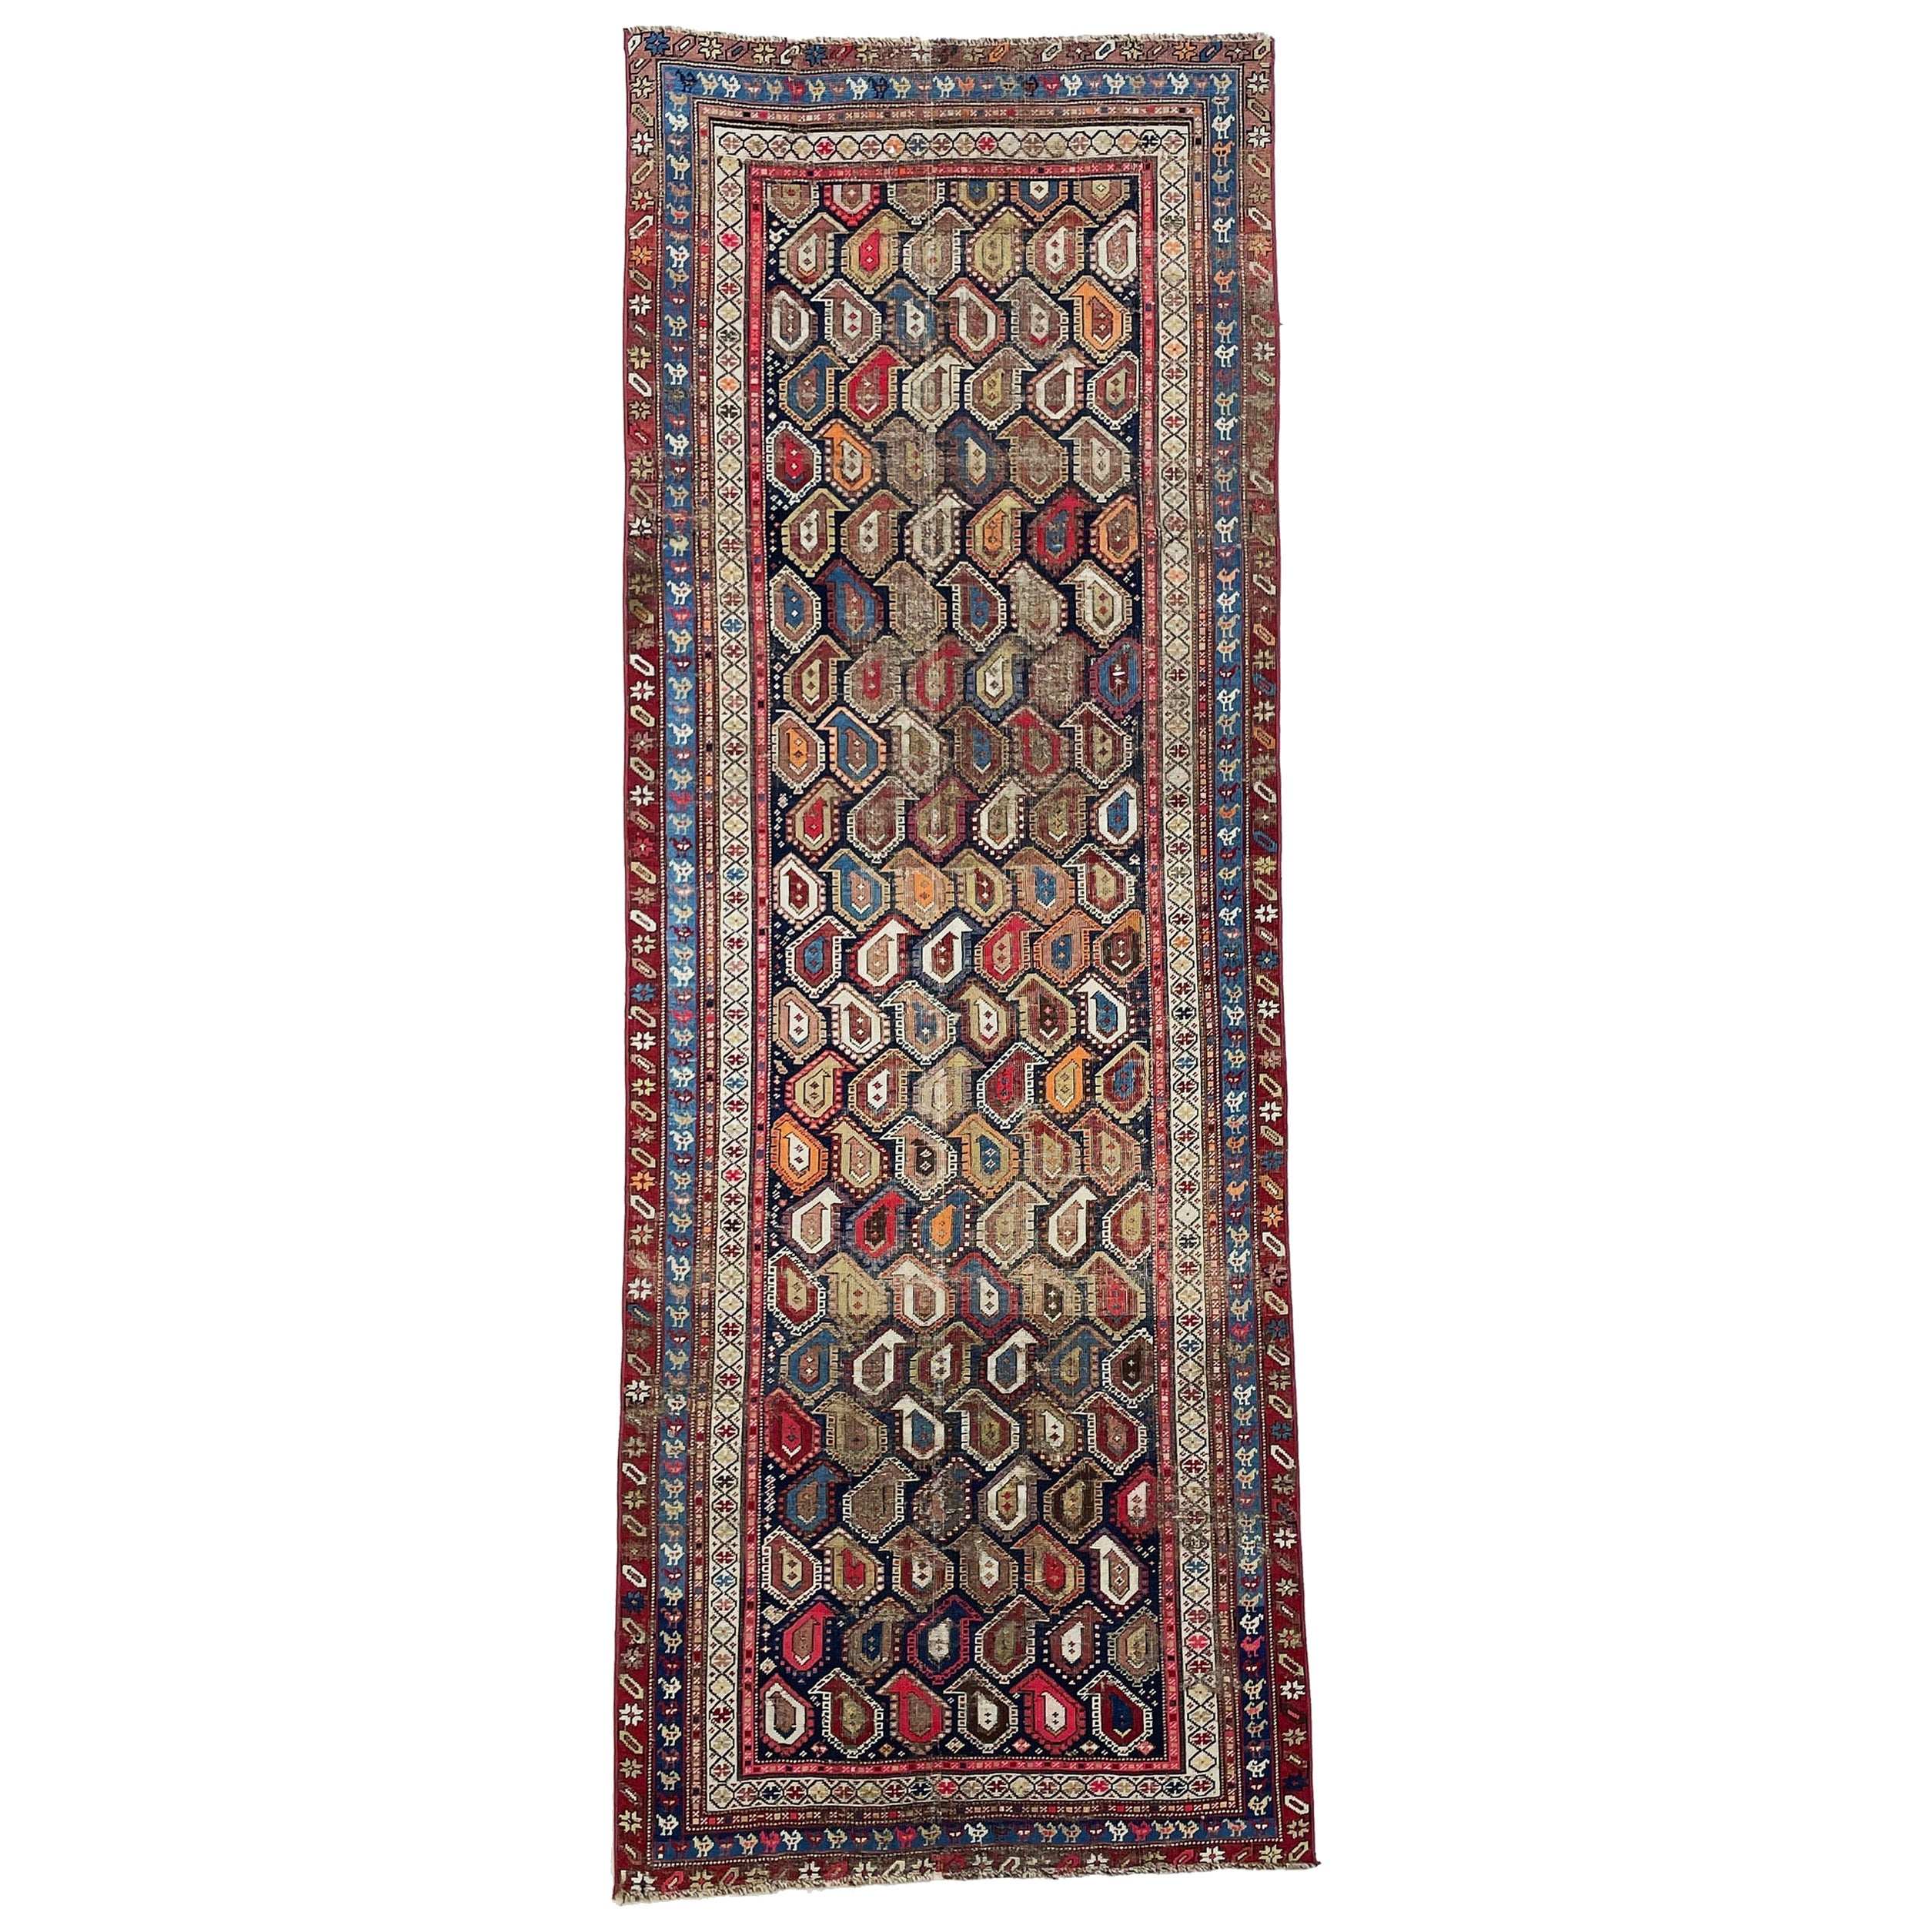 Artistic Antique Persian Runner with All-Over Interlocking-Boteh/Paisley Design 